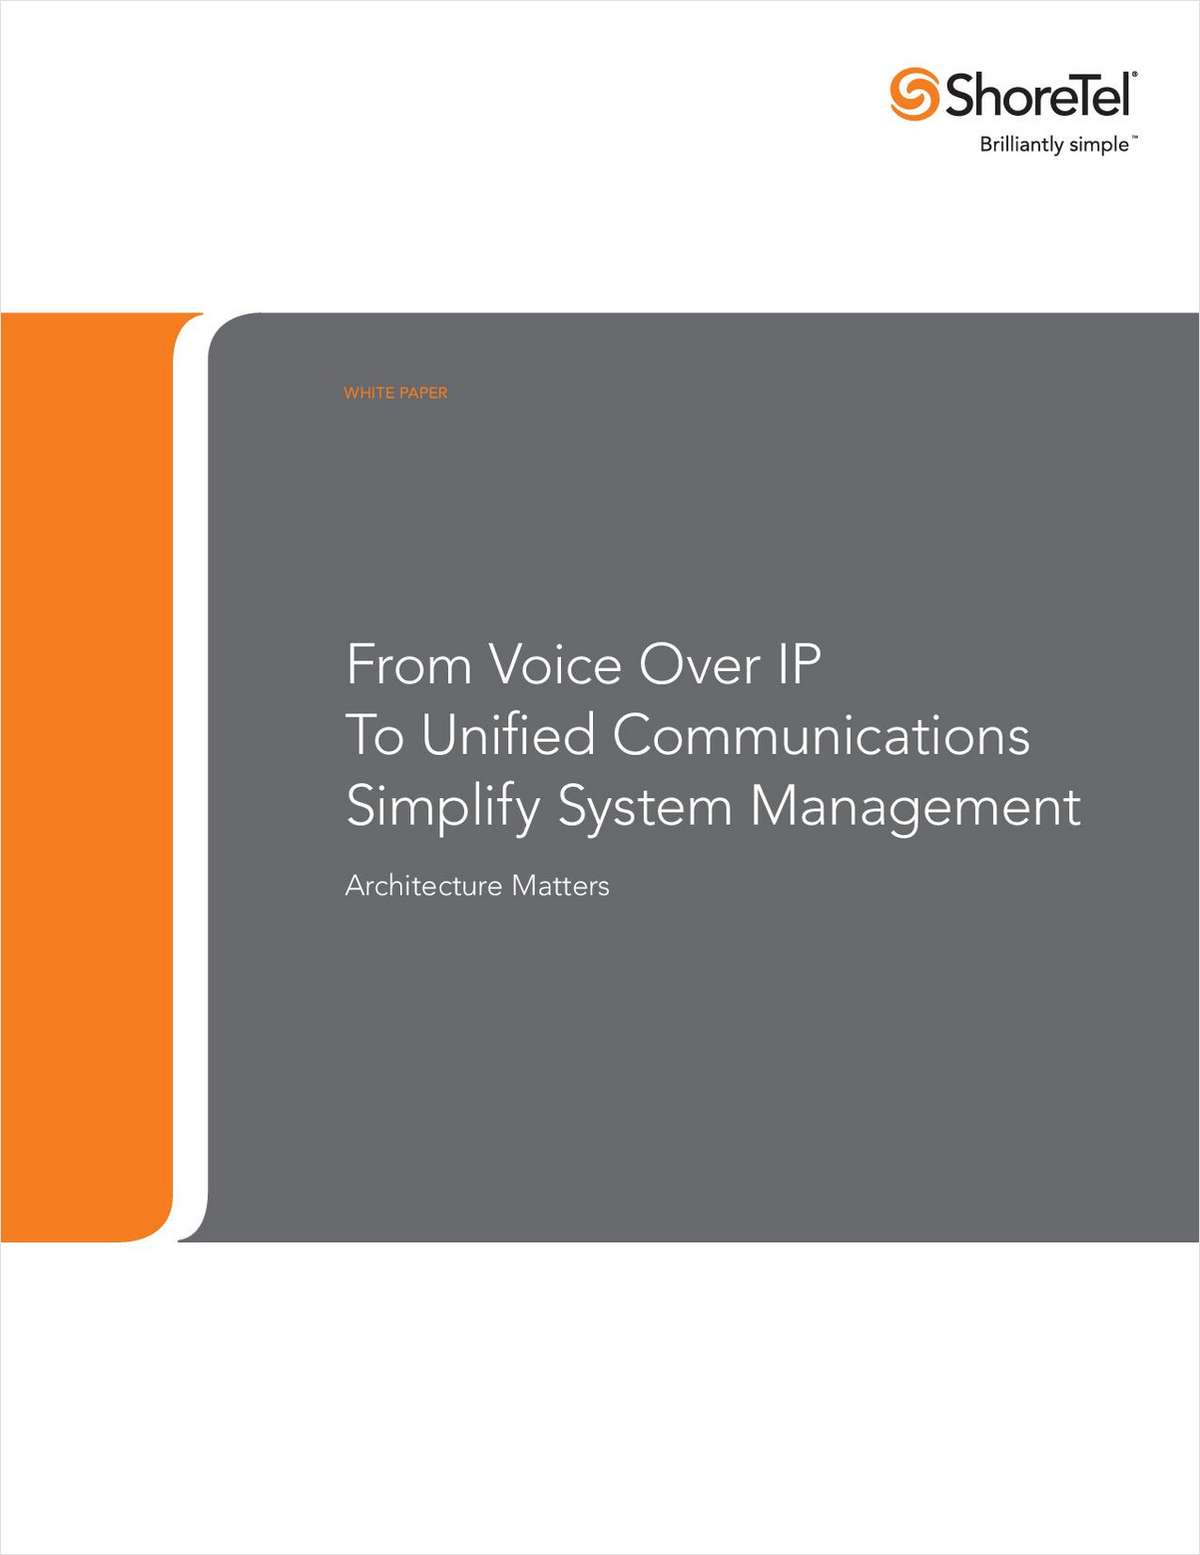 From Voice over IP to Unified Communications: Simplify System Management